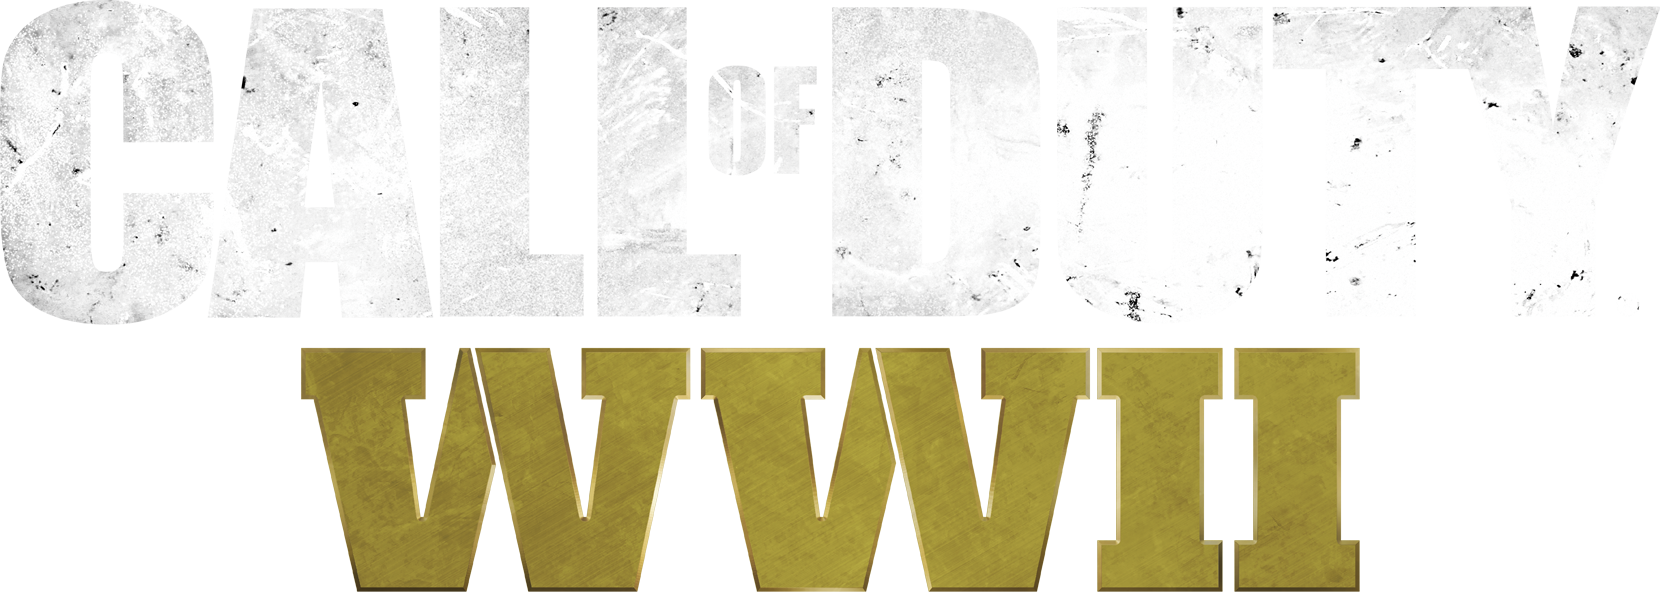 Call of Duty®: WWII - The War Machine: DLC Pack 2